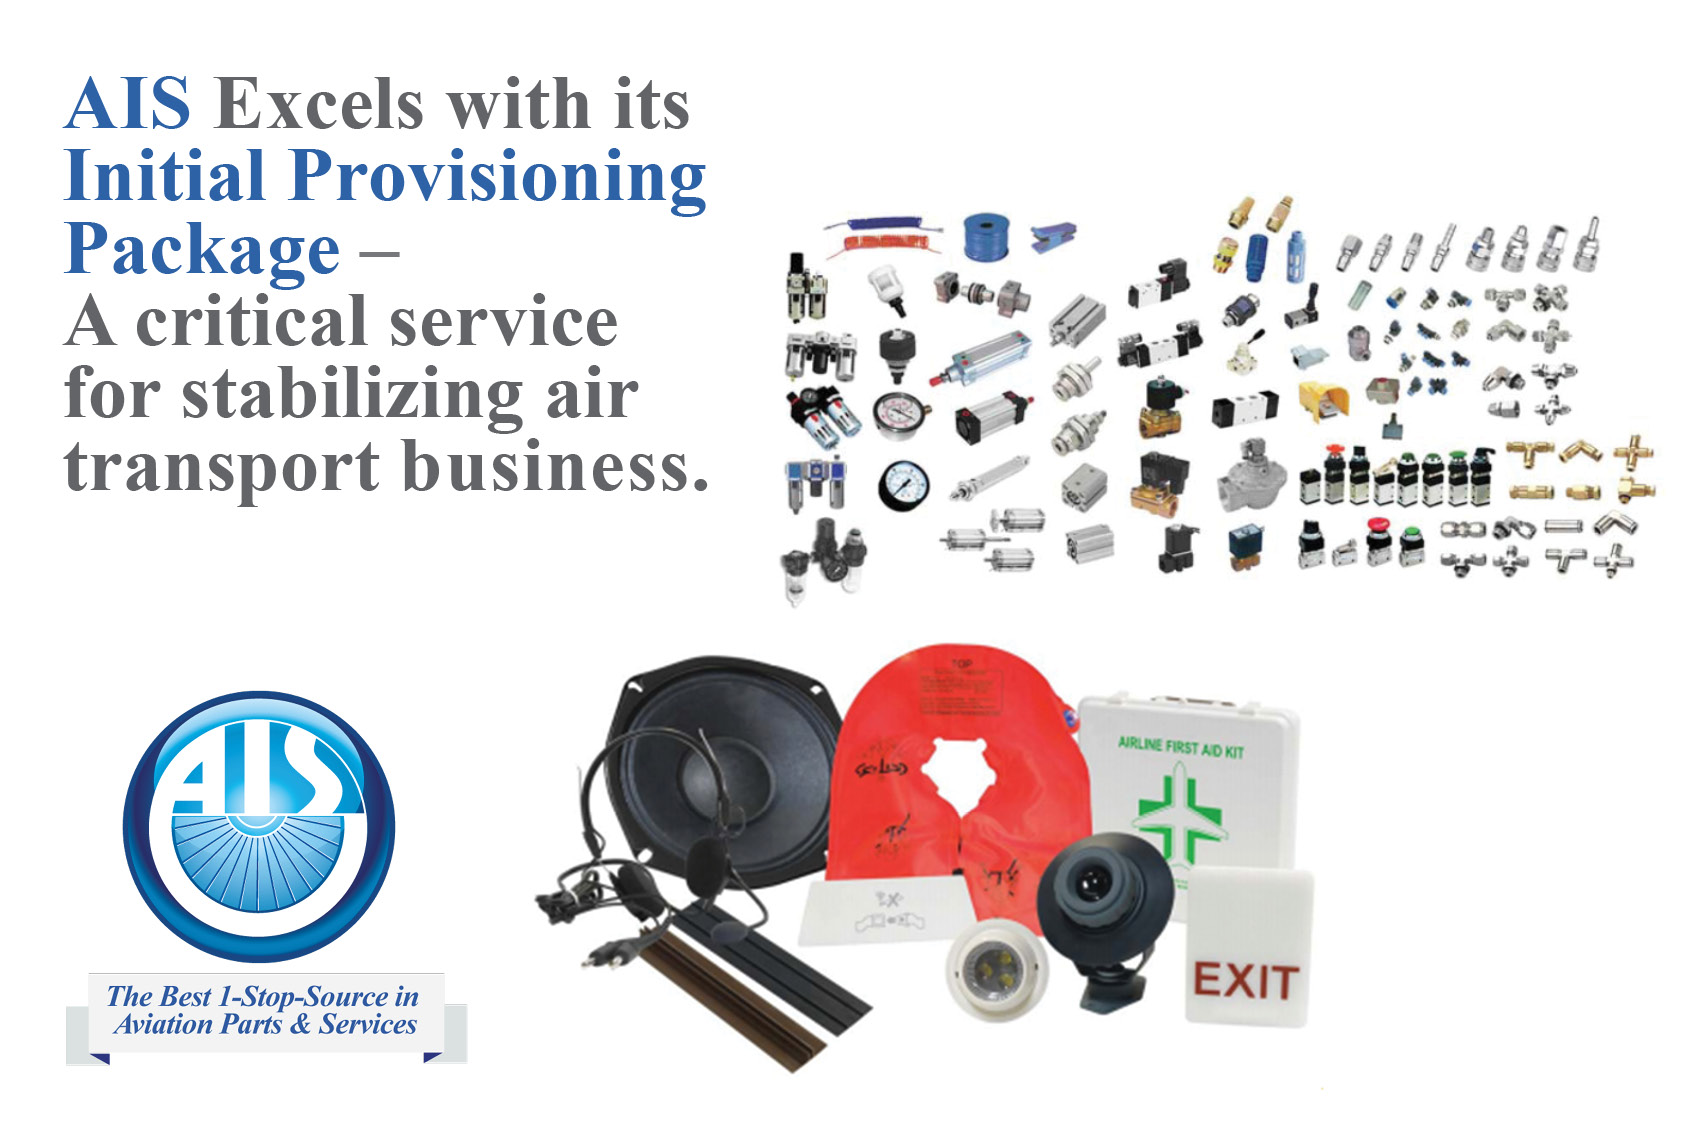 provide Initial Provisioning of Recommended Spare Parts List (RSPL) on contract basis as well as post - Initial Provisioning warranty administration